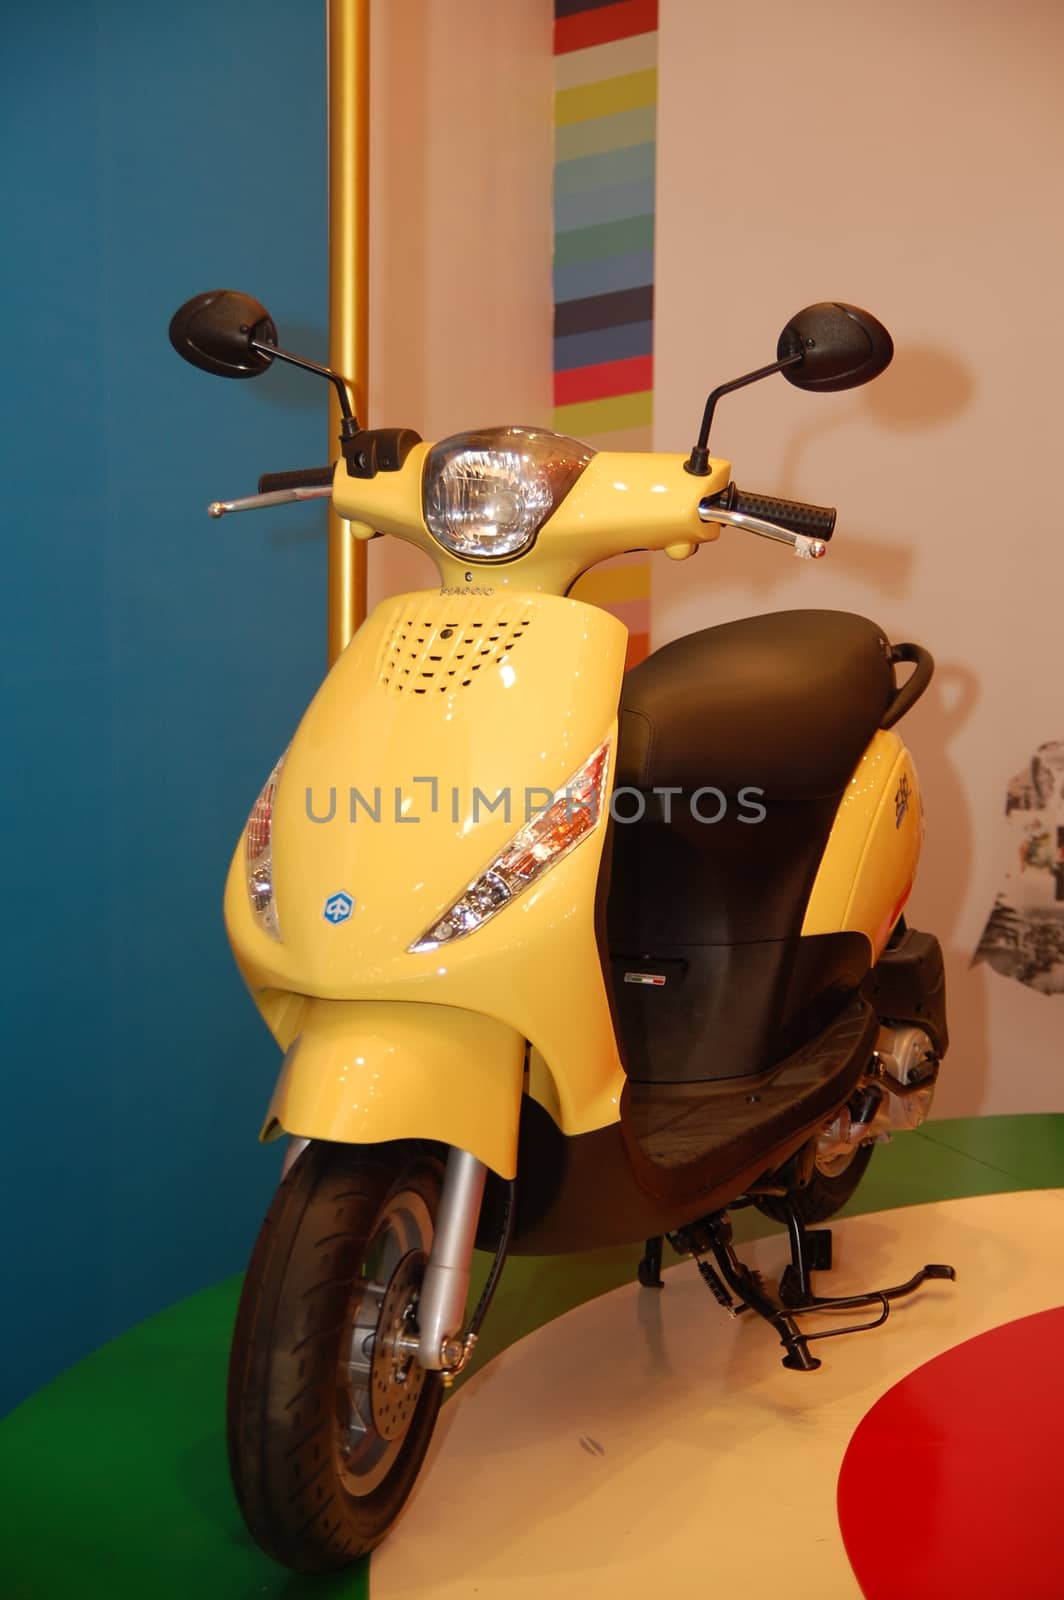 Piaggio scooter at 8th Manila International Auto Show in Pasay,  by imwaltersy